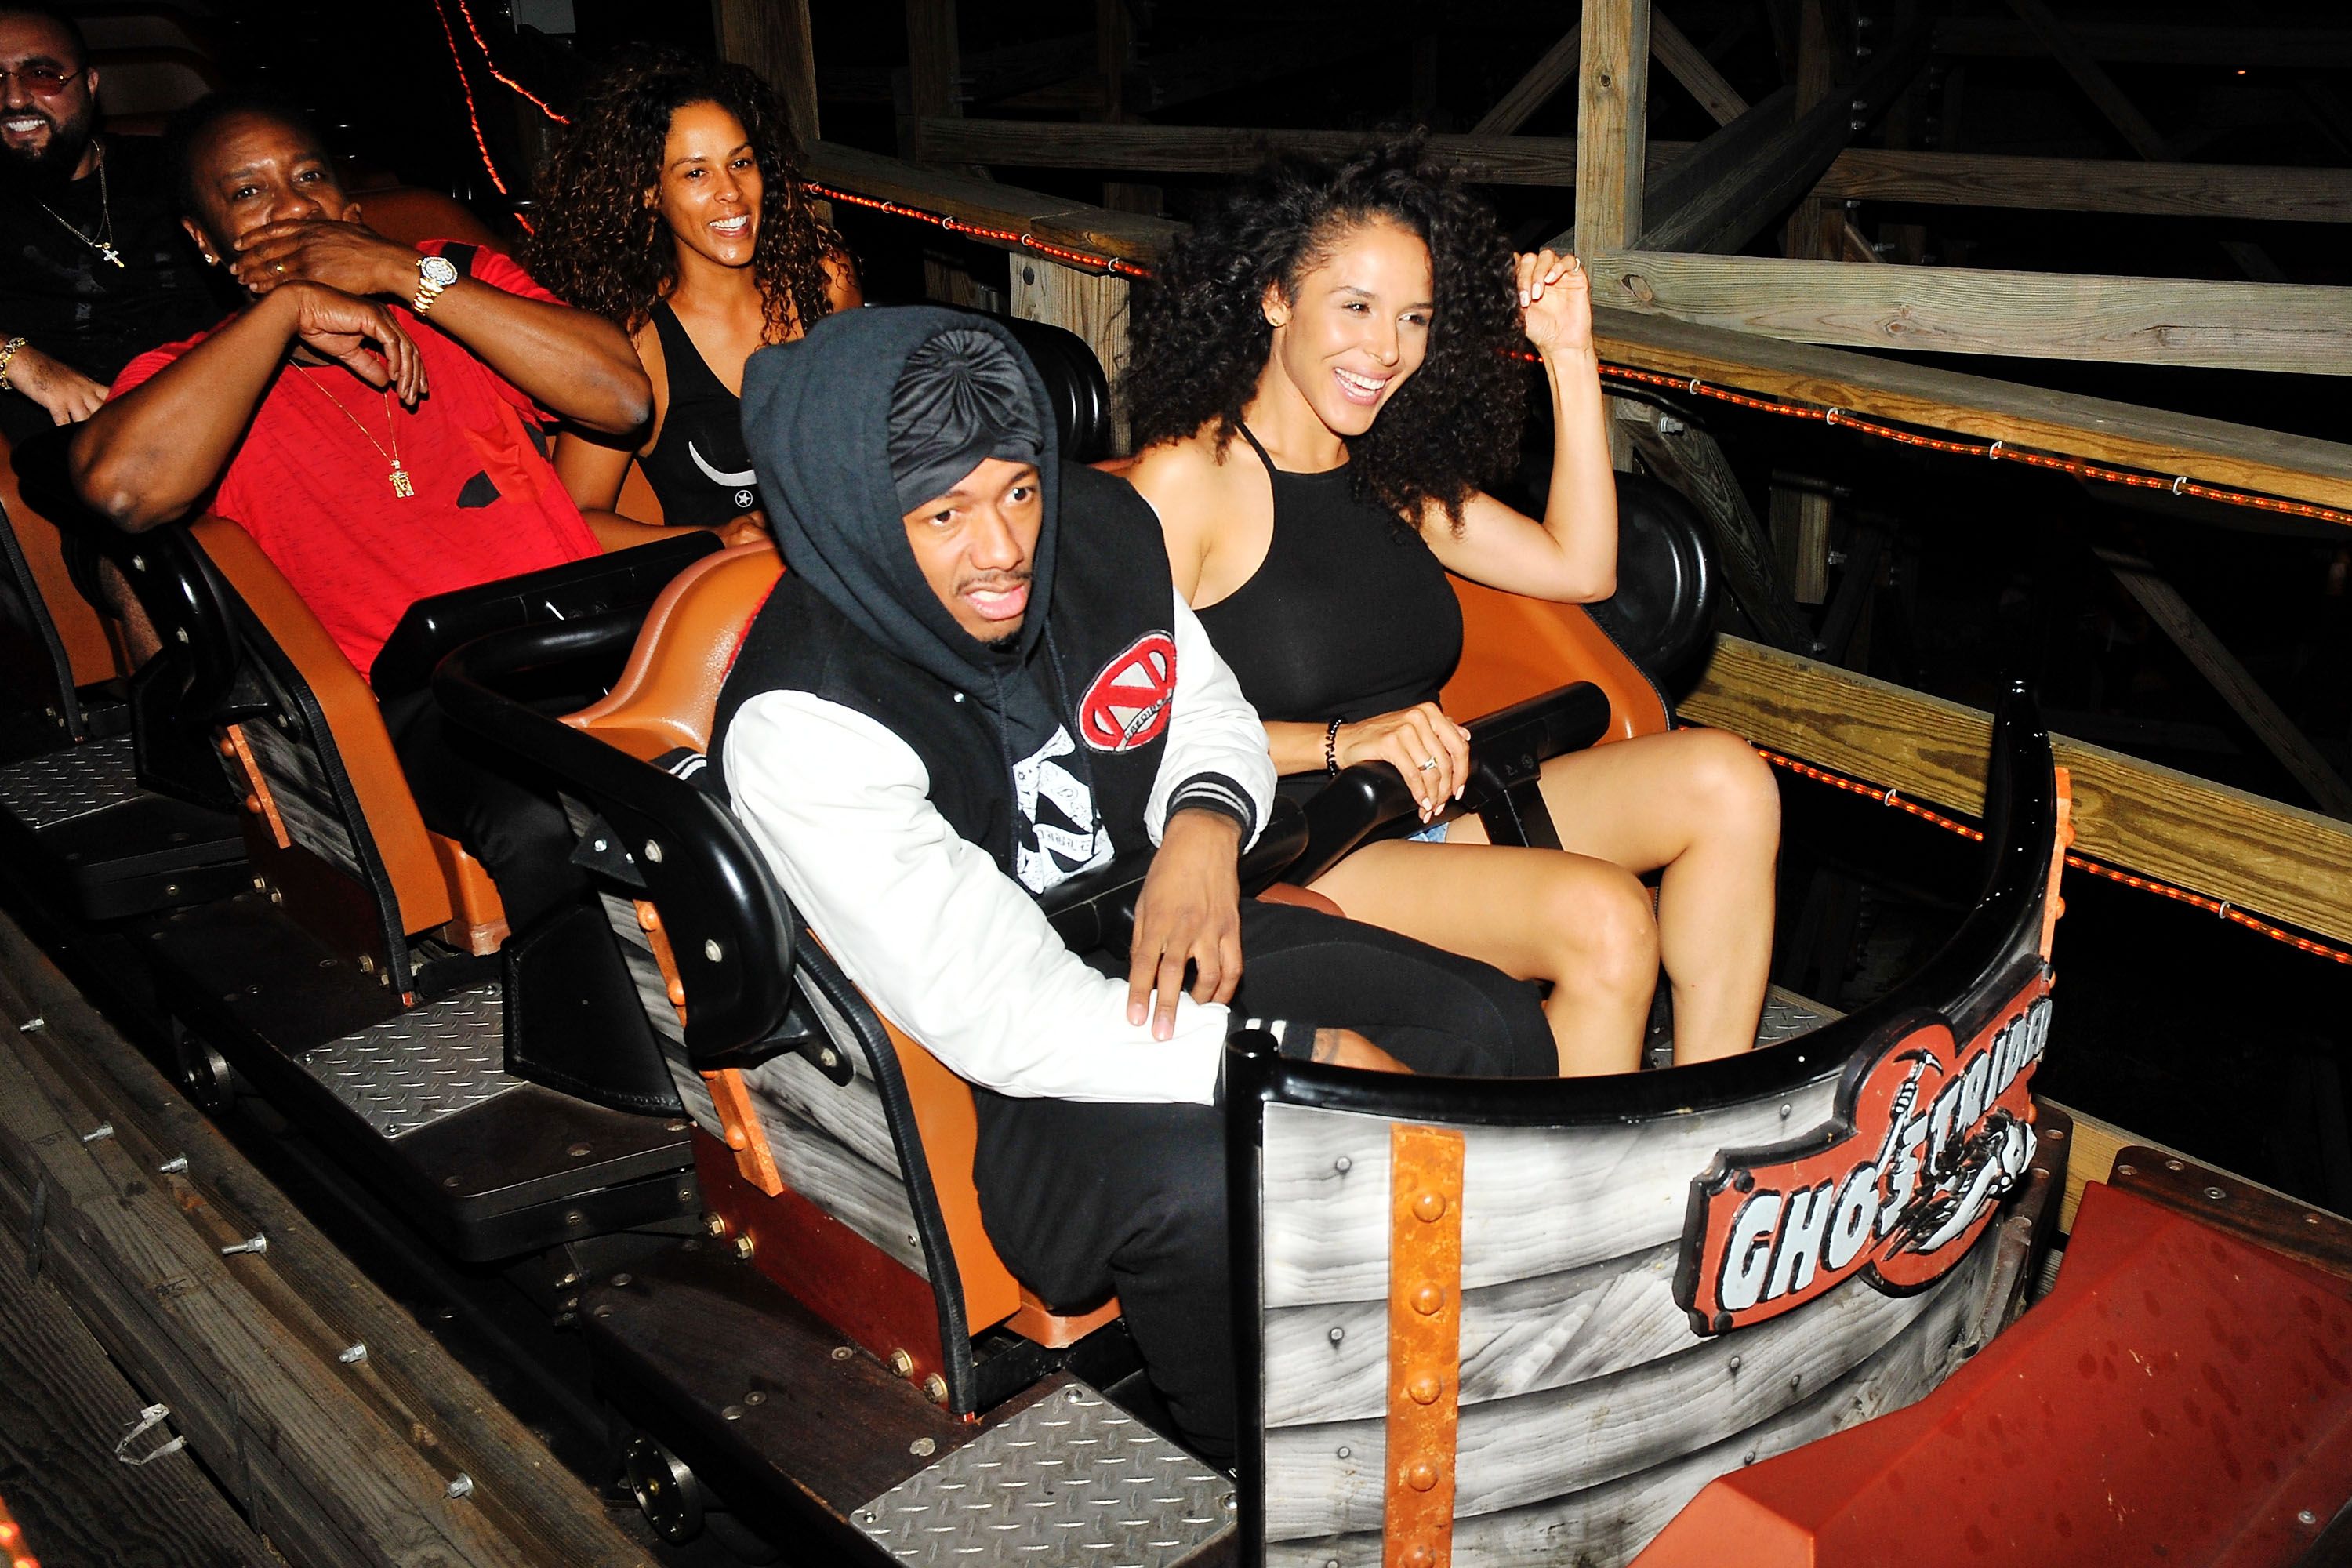 Nick Cannon and Brittany Bell at the "Ghostrider" roller coaster at Knott's Berry Farm on September 1, 2017 in Buena Park, California. | Source: Getty Images